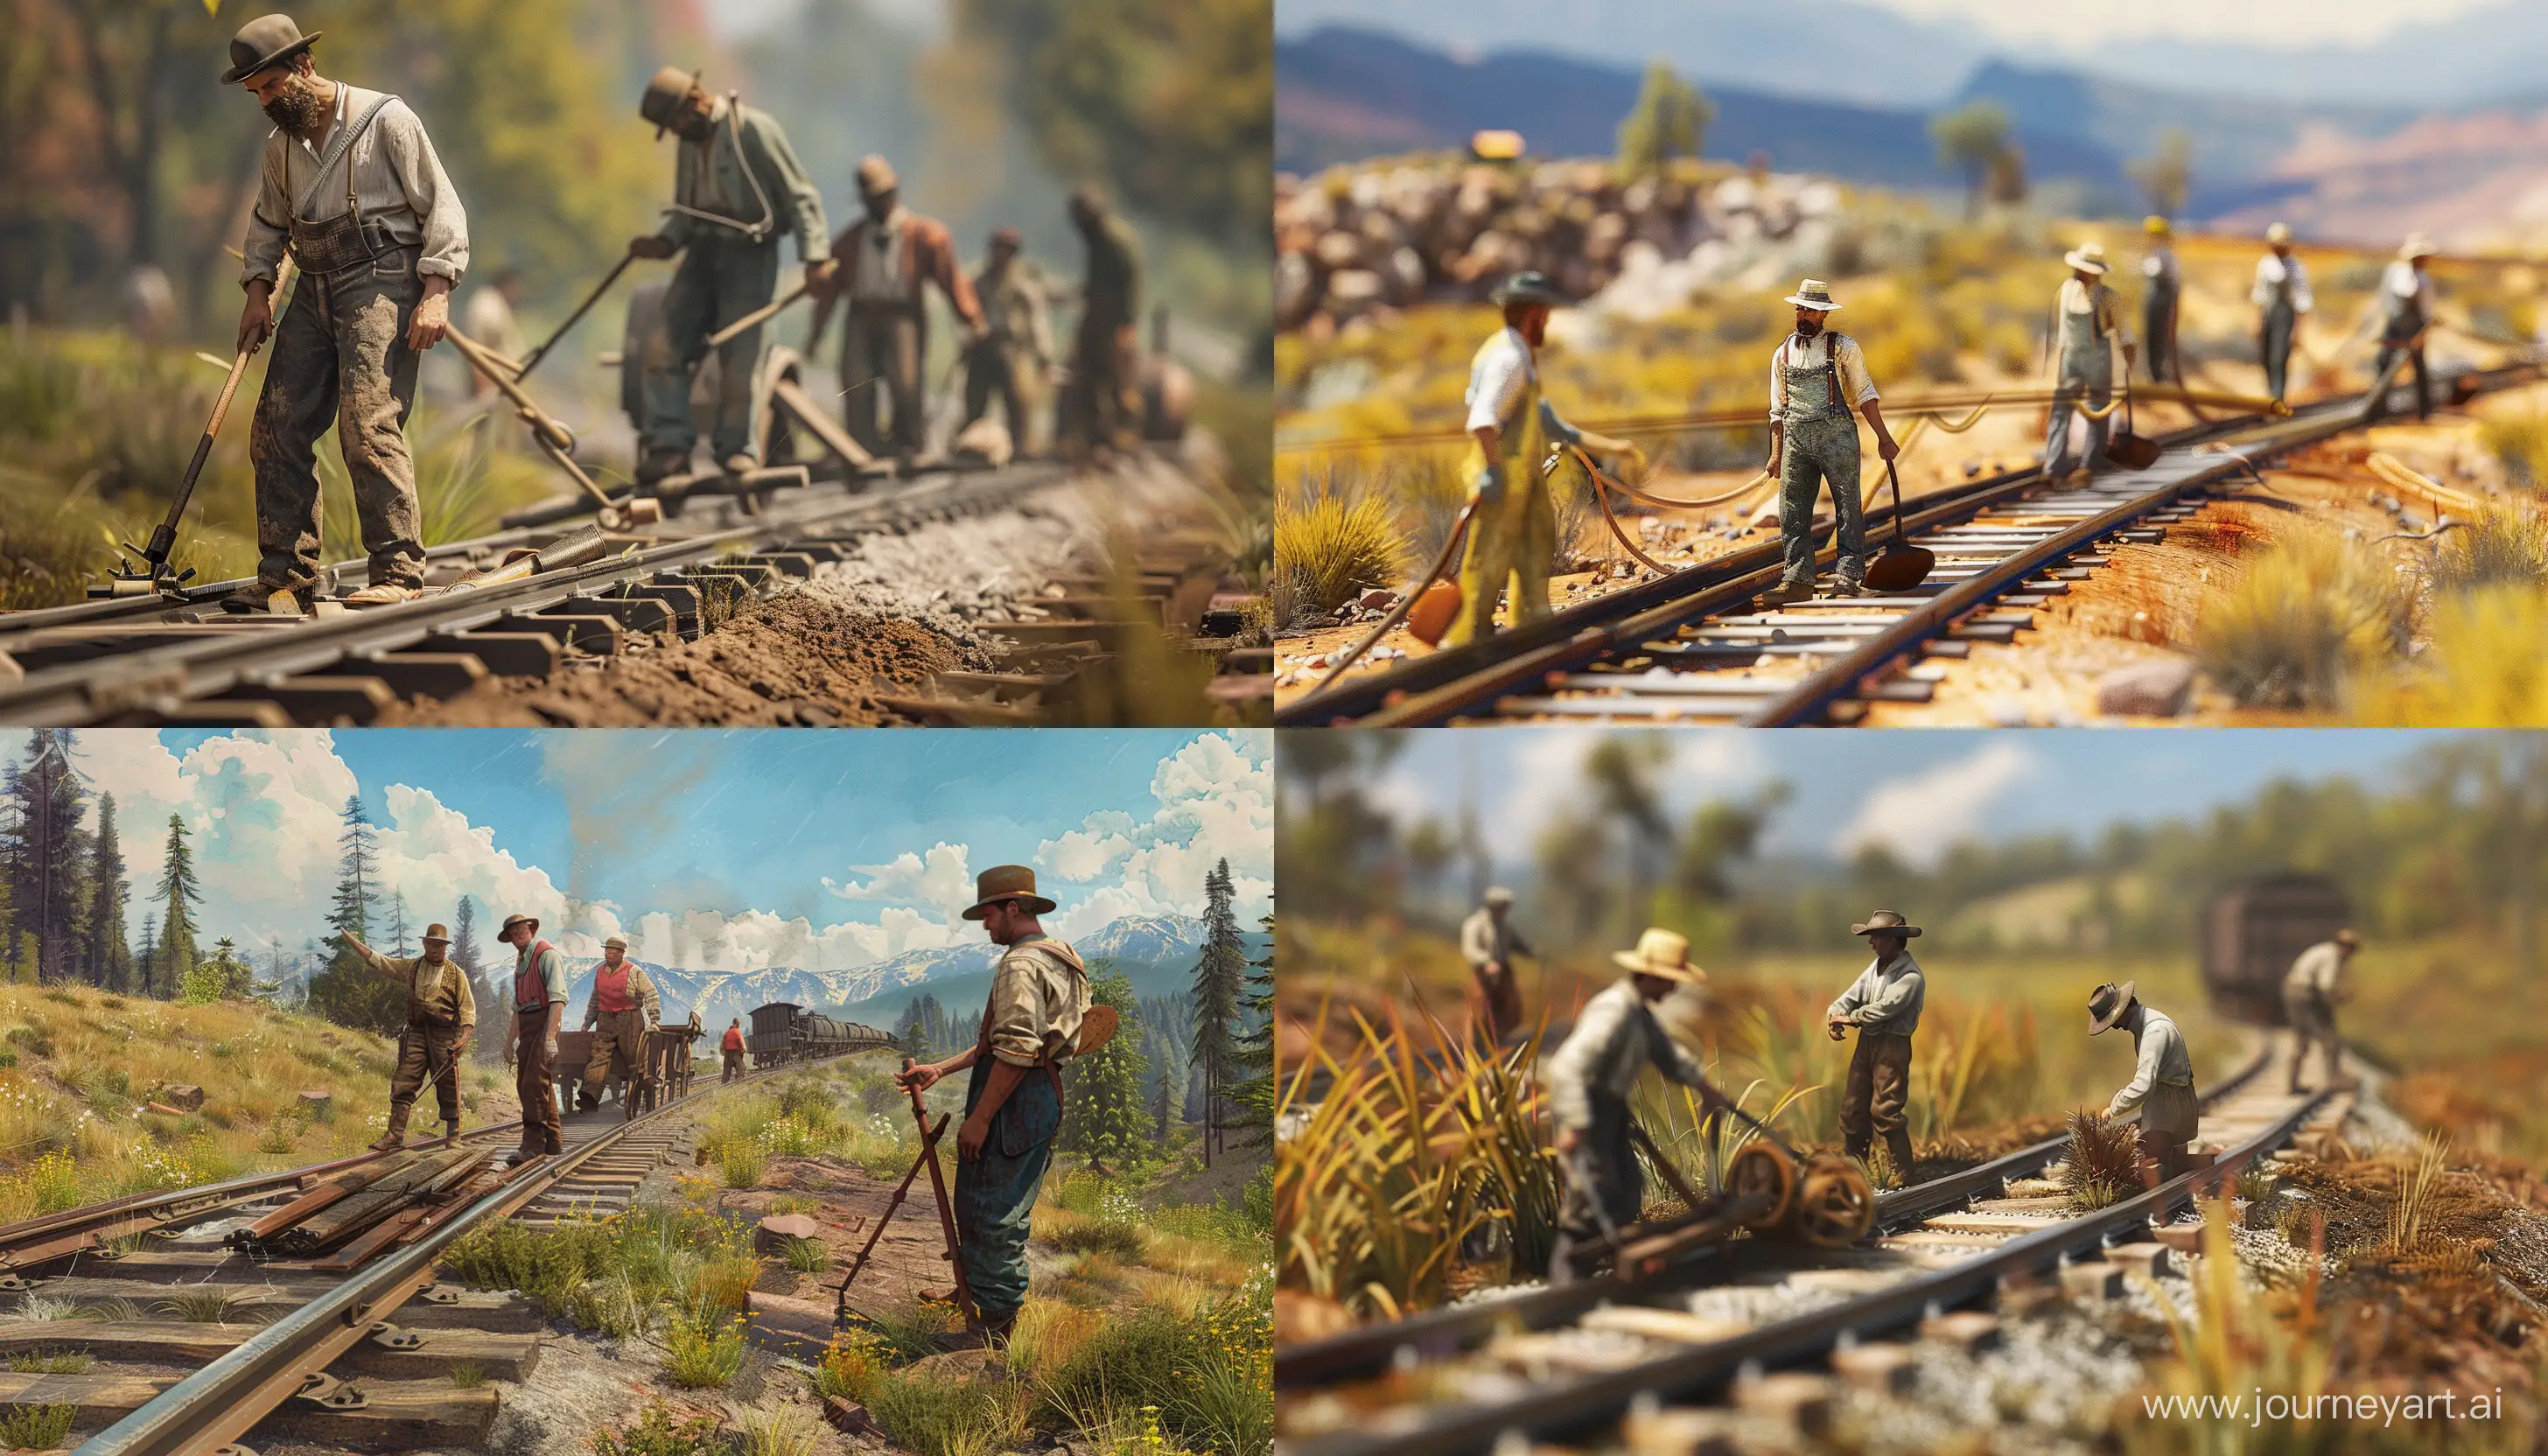 Railway-Workers-in-1850-on-American-Frontier-Natural-Landscape-Scene-with-Detailed-Realism